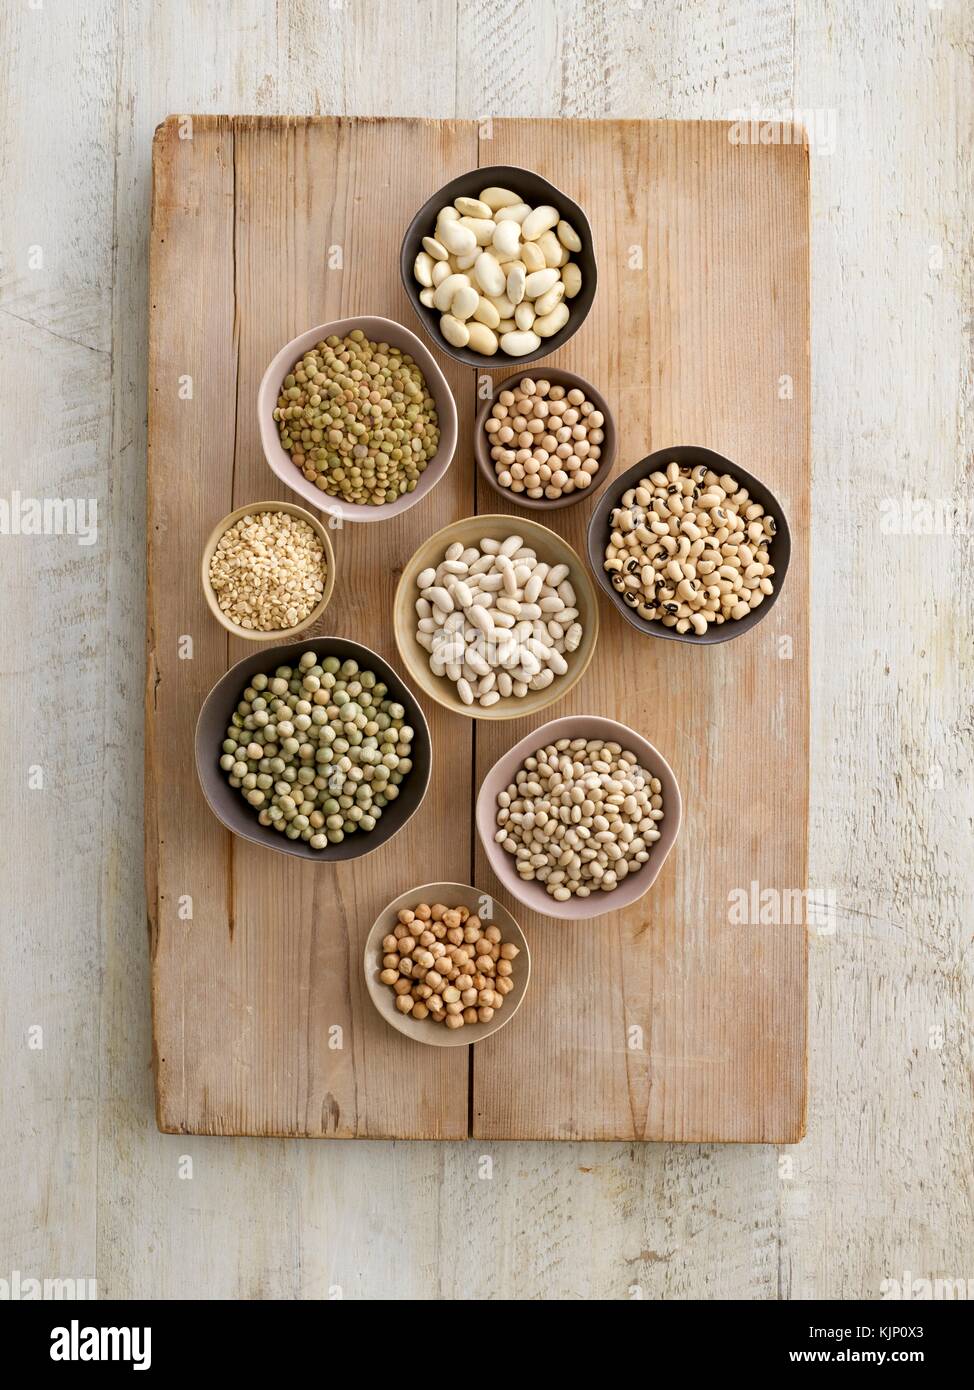 Pulses in bowls on a chopping board, overhead view. Stock Photo